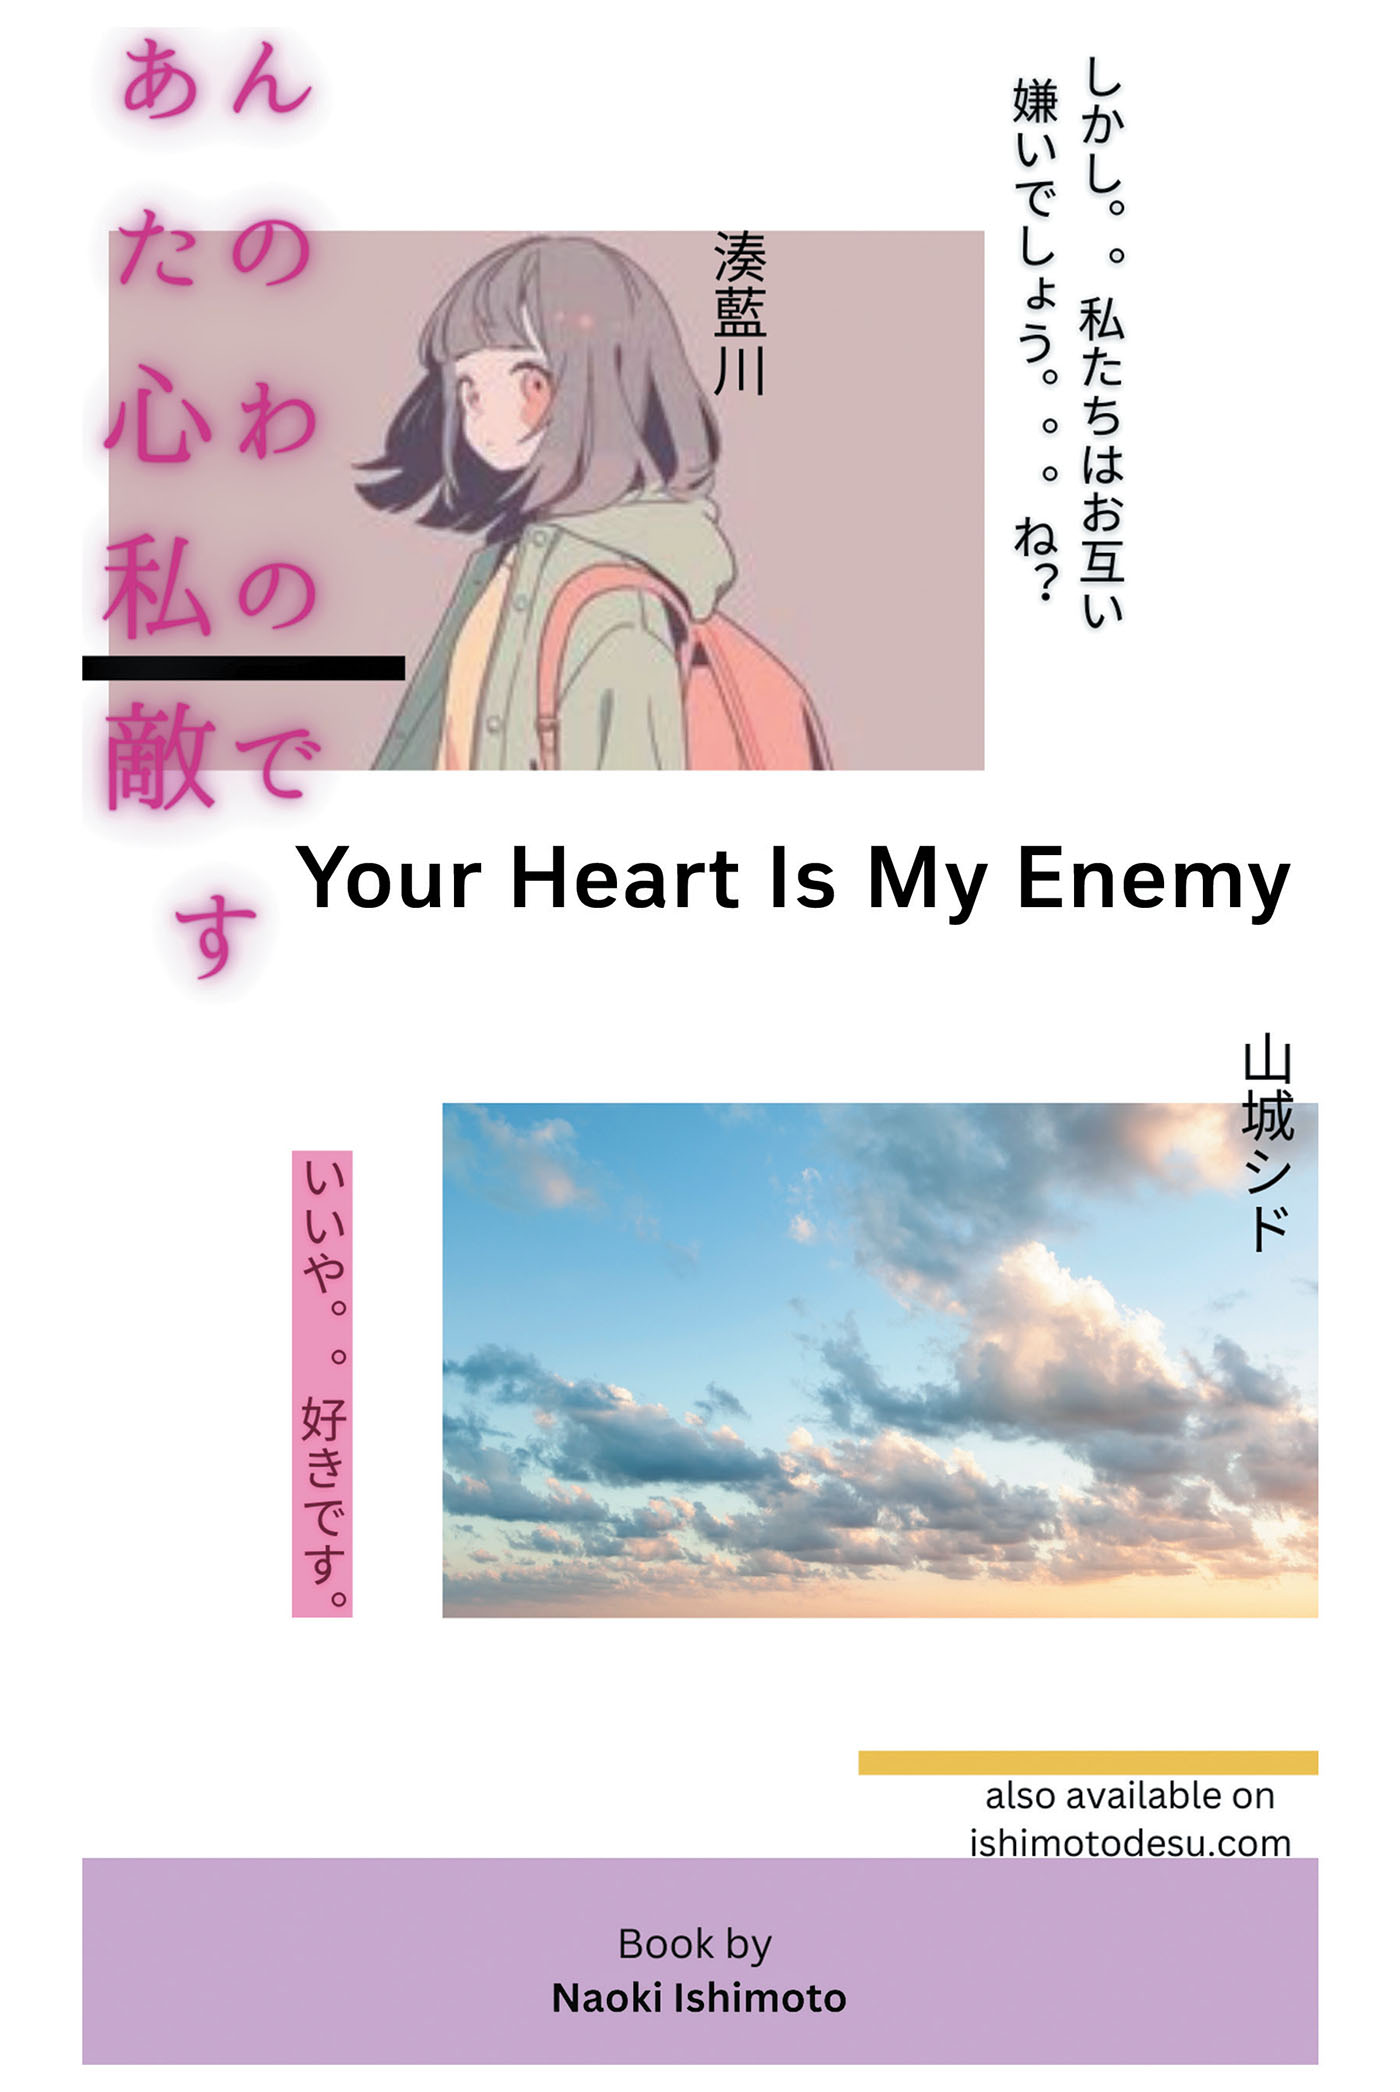 Author Naoki Ishimoto’s New Book, “Your Heart Is My Enemy,” is the Story of a Passionate Love Triangle Featuring Anger and Kindness